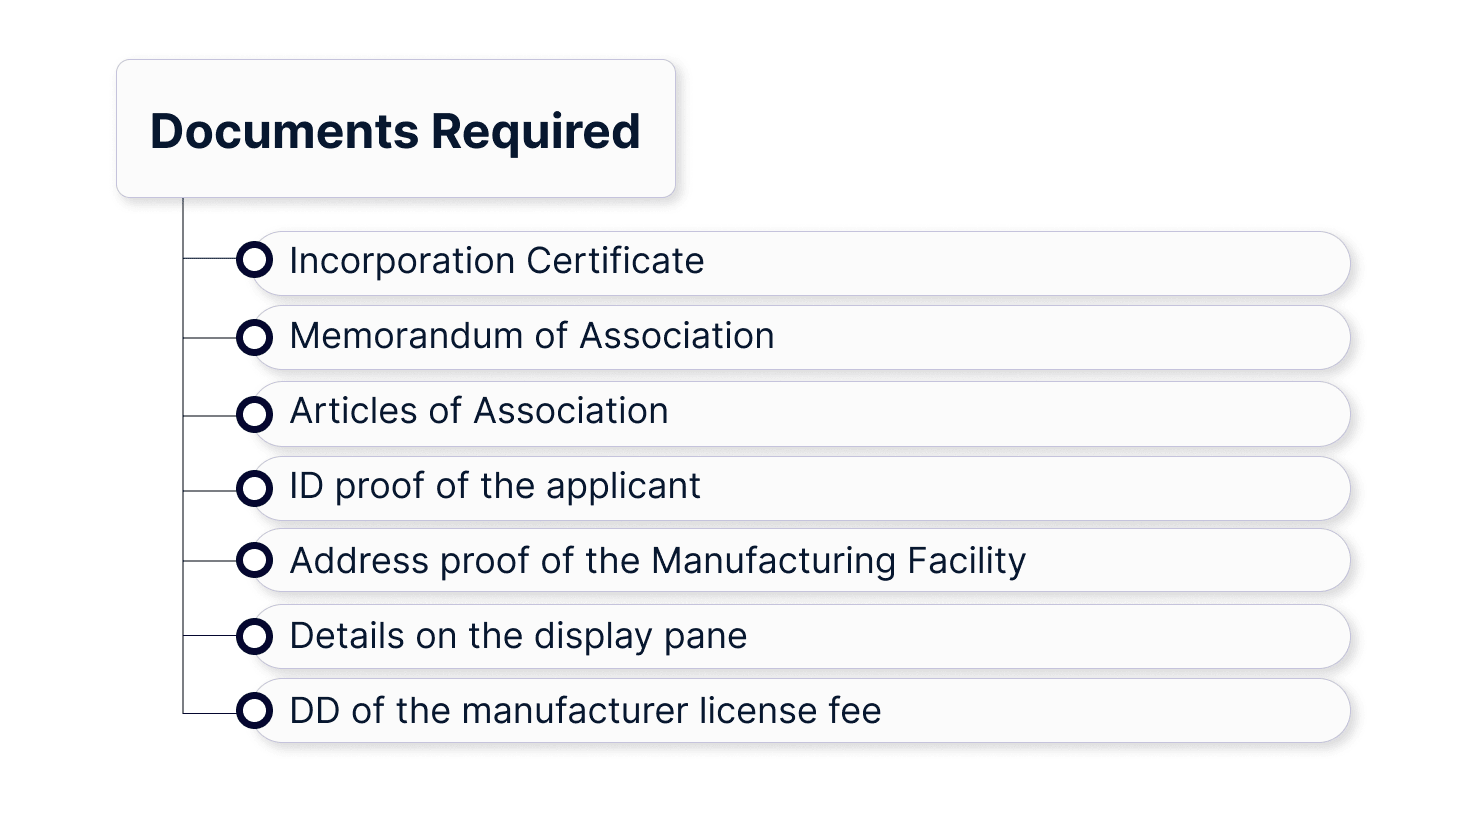 Documents Required for Manufacturing Certificate in India